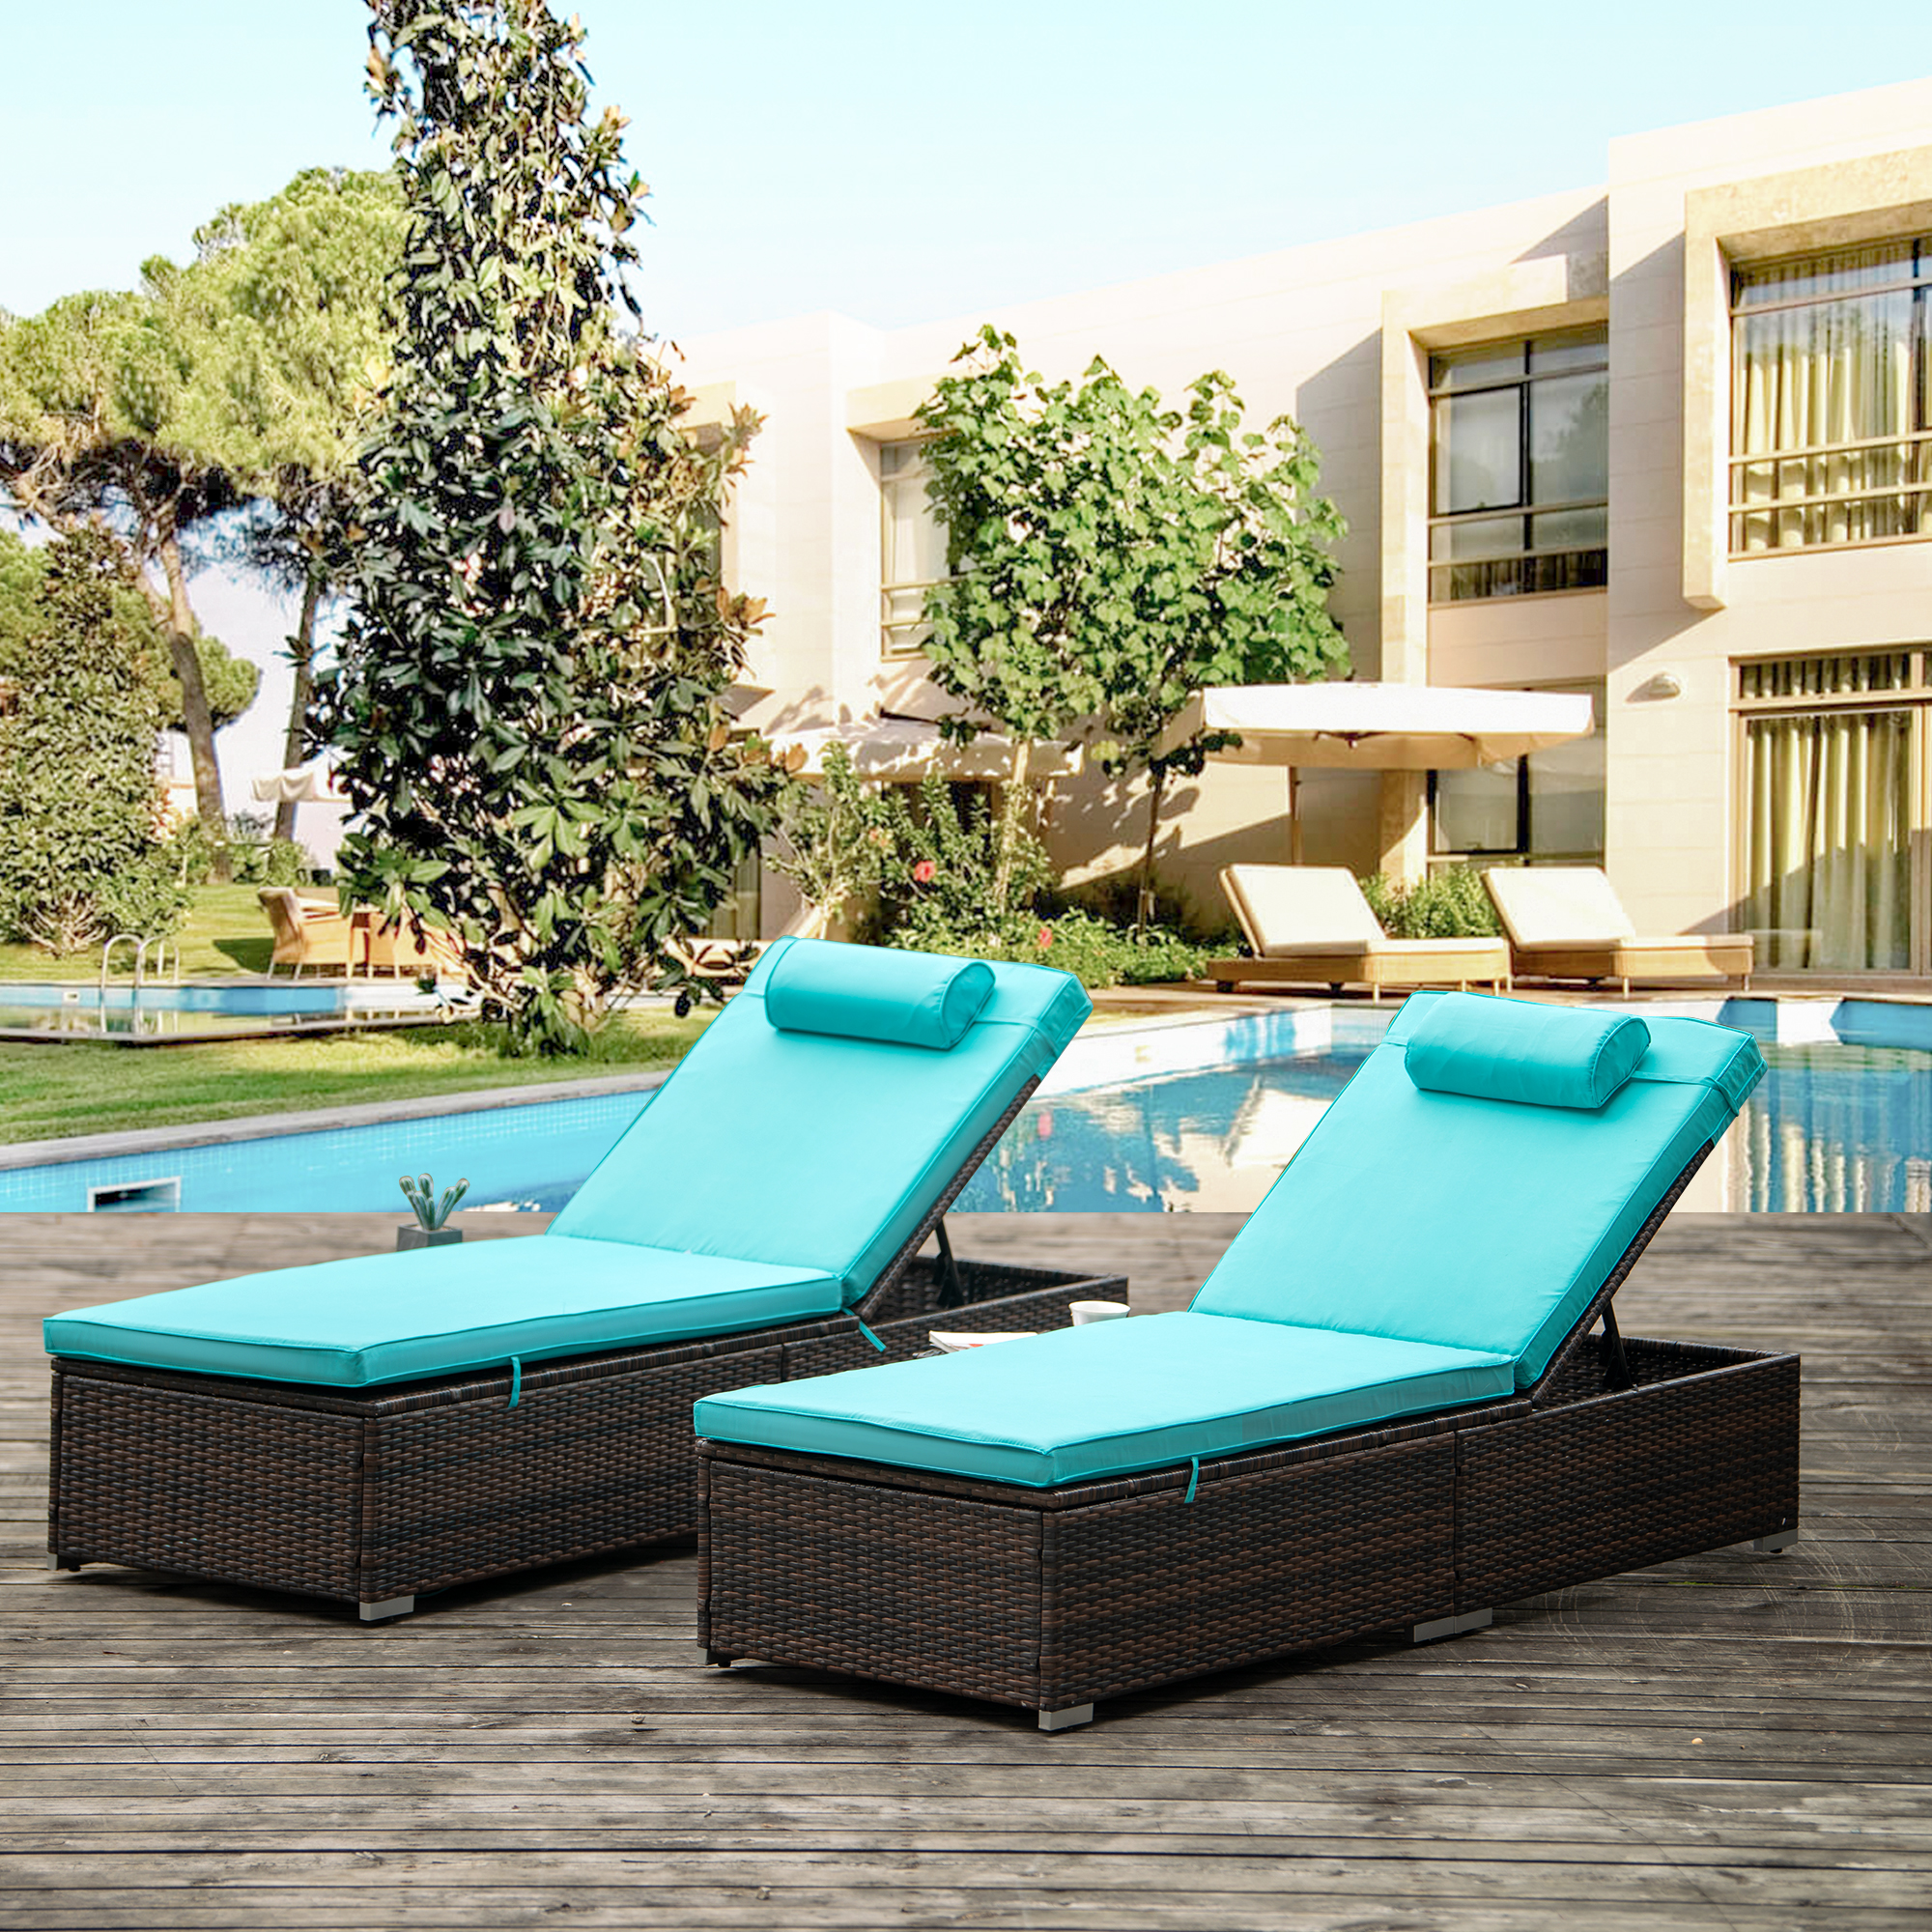 2 Piece Patio Chaise Lounge Furniture Set with Side Table, 5-Position Adjustable Cushioned Rattan Chaise Lounge with Head Pillow, PE Rattan Backrest Lounge Chairs Set for Pool Balcony Deck Yard, B21 - image 2 of 11